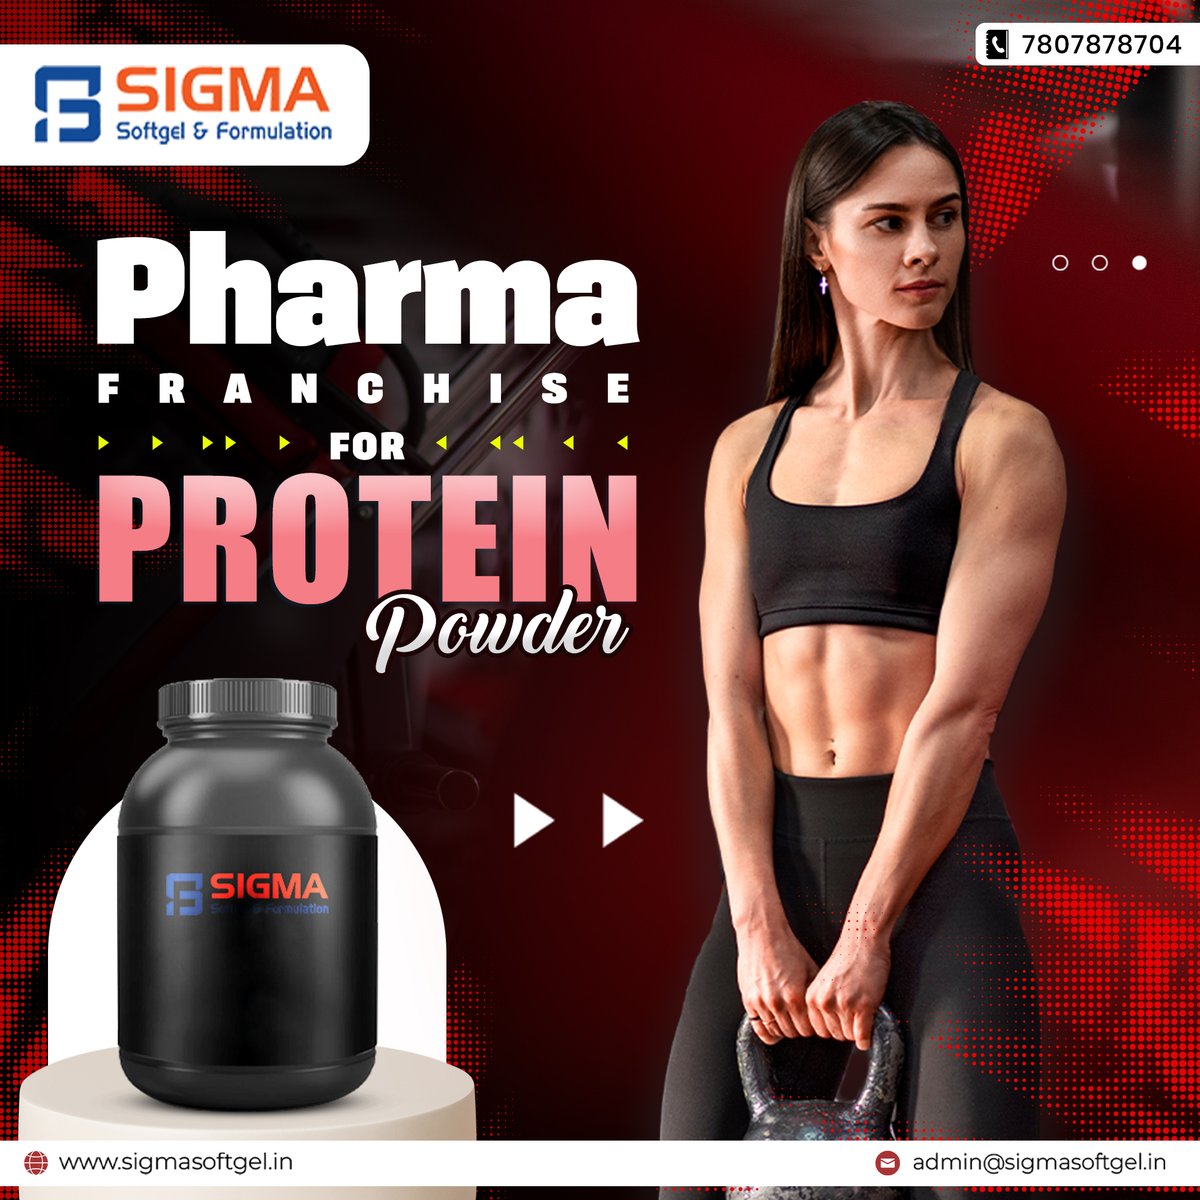 Sigma Softgel & Formulation provides you the best PCD Pharma franchise for the protein powder.

Visit at - sigmasoftgel.in/others/

#proteinpowder #sigmasoftgel #sigmasoftgel #ayurvedicmedicine #pharmafranchise #pcdpharma #sigmasoftgelformaulation #pharmafranchise #india